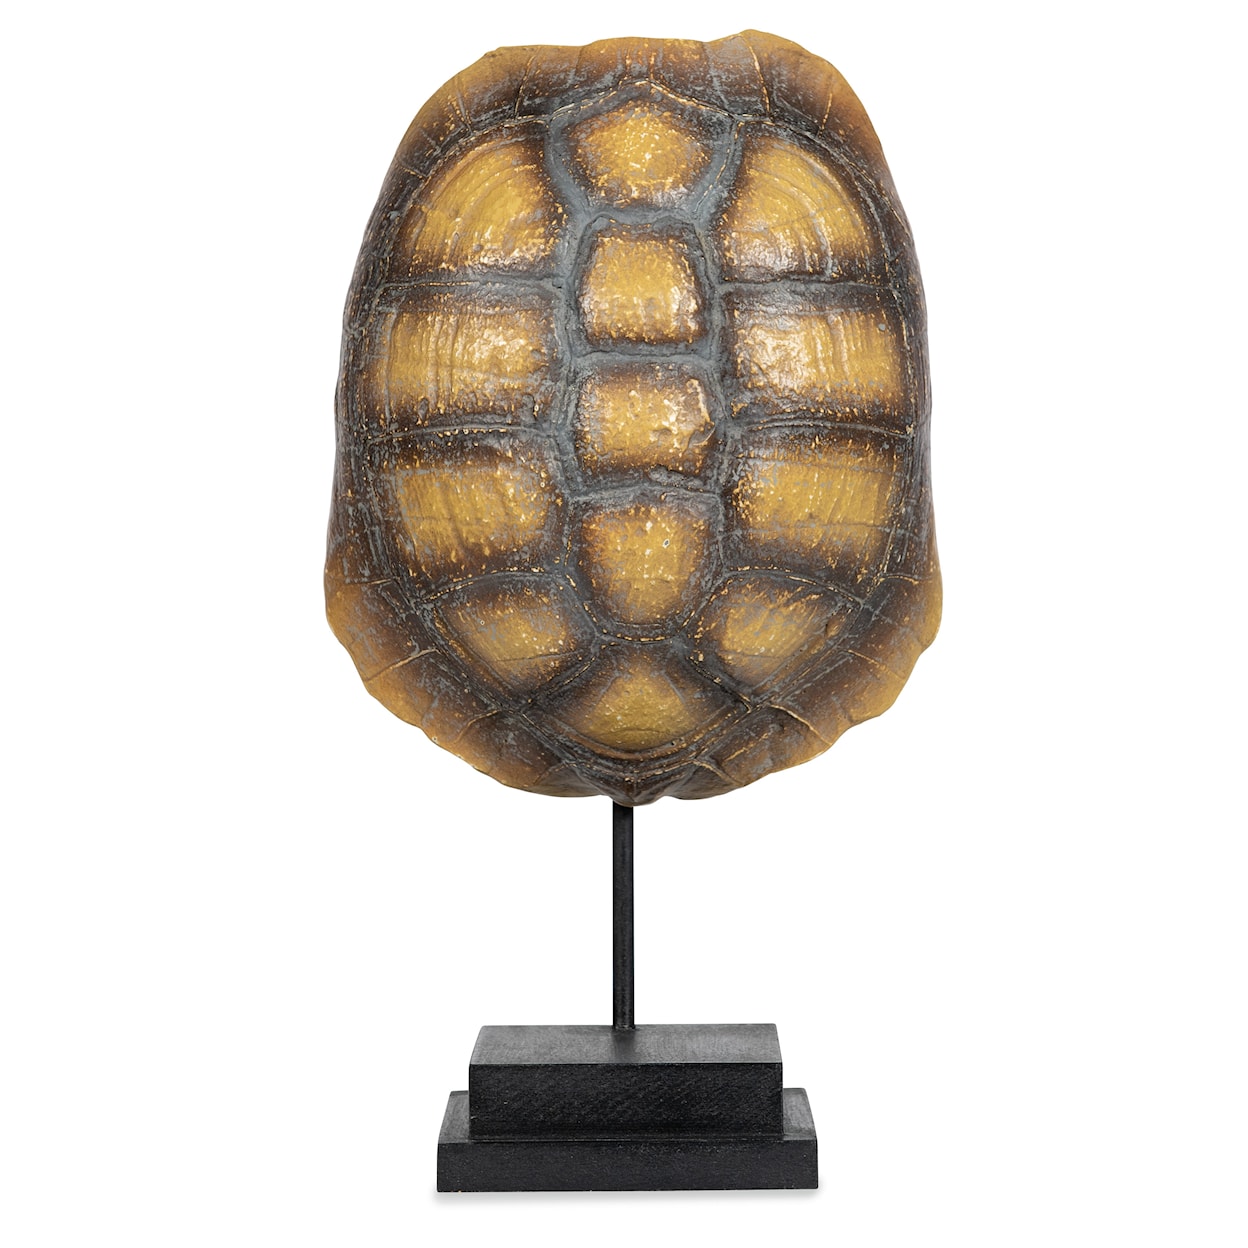 BOBO Intriguing Objects BOBO Intriguing Objects Faux Yellow Footed Tortoise Shell on Stand